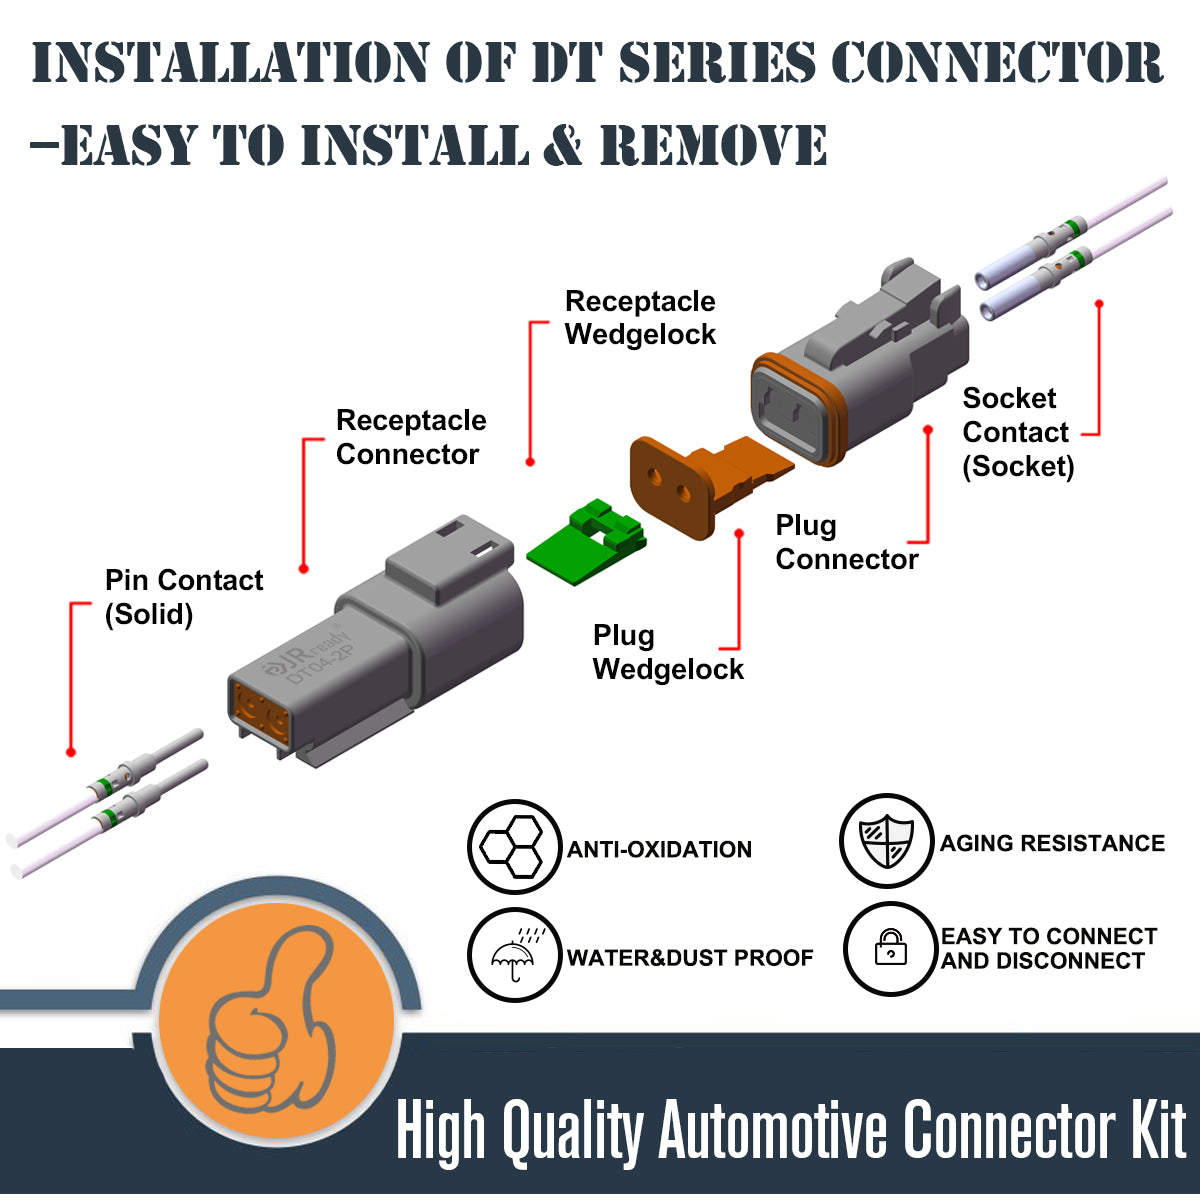 JRready ST6365 DT Connector Kit: DT 2 3 4 6 8 12 Pin Connectors 2 Pairs With Solid Contacts